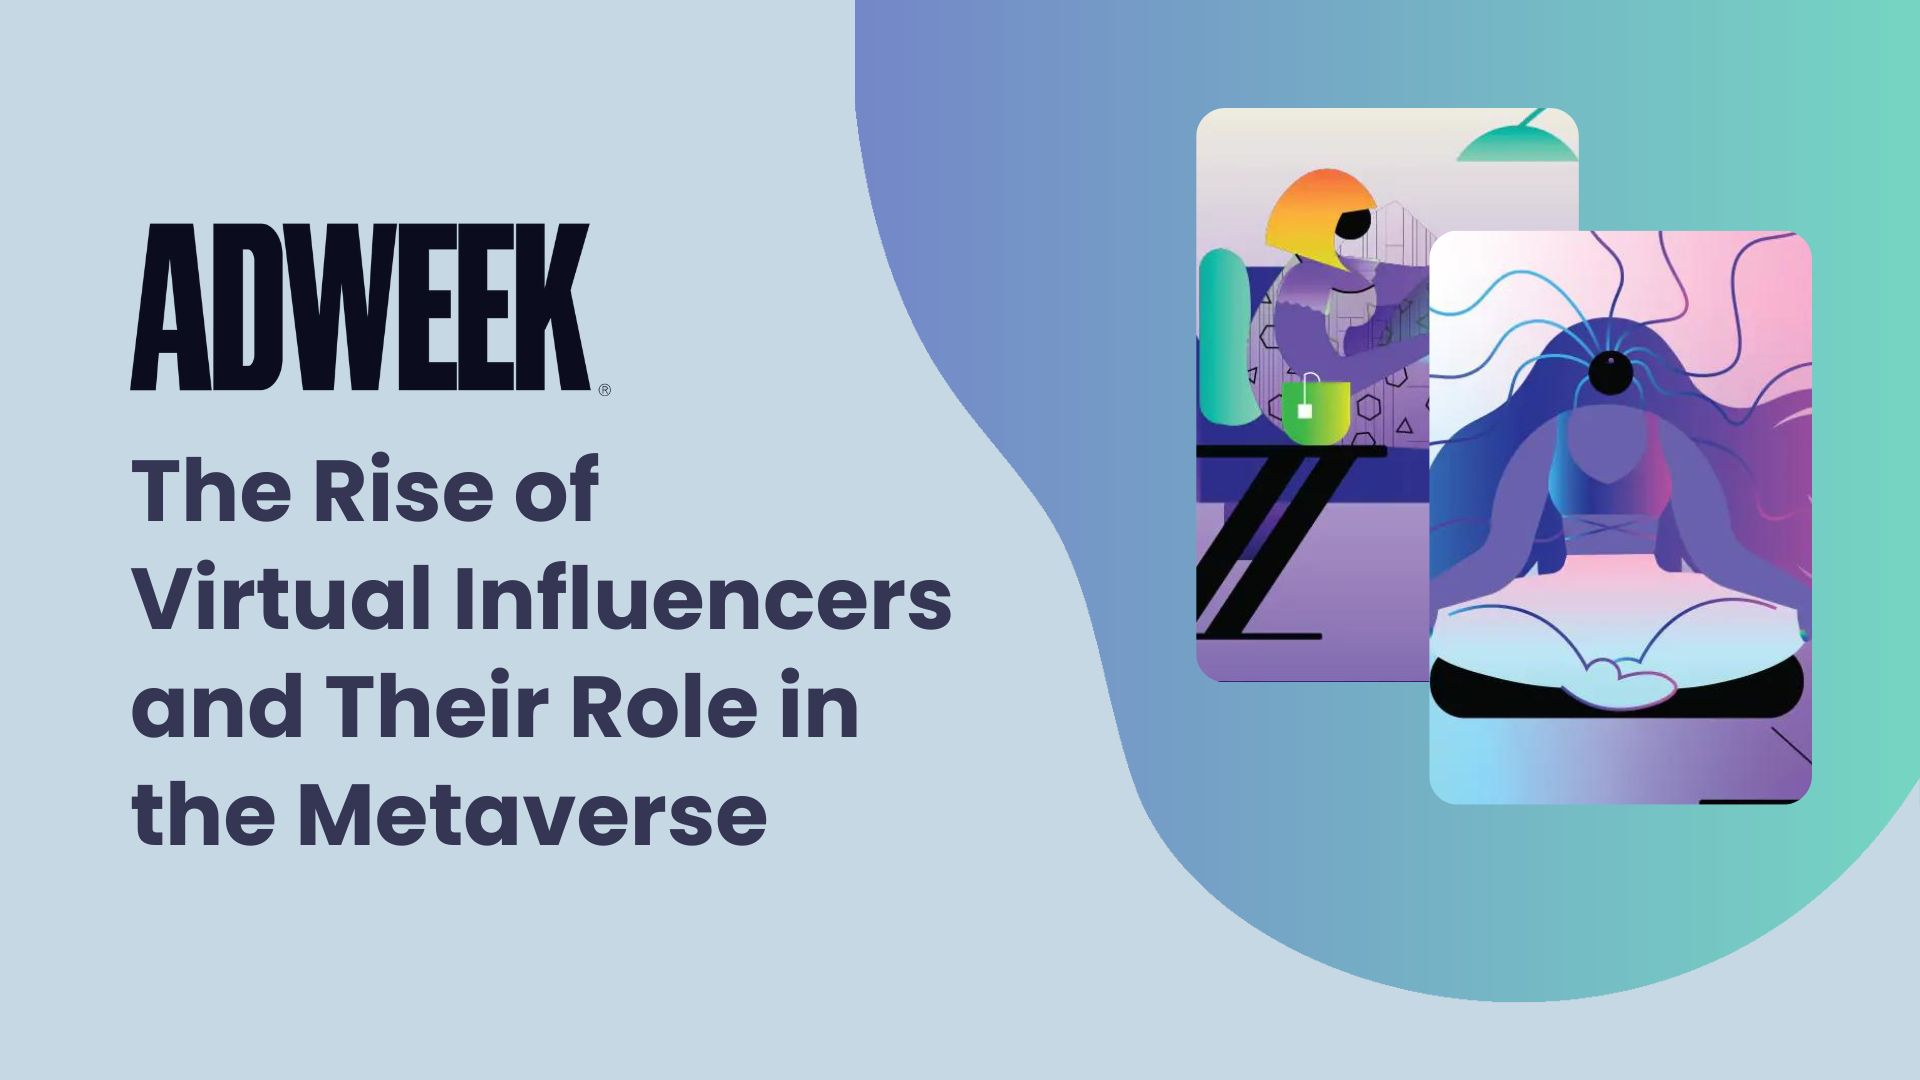 The Rise of Virtual Influencers and Their Role in the Metaverse